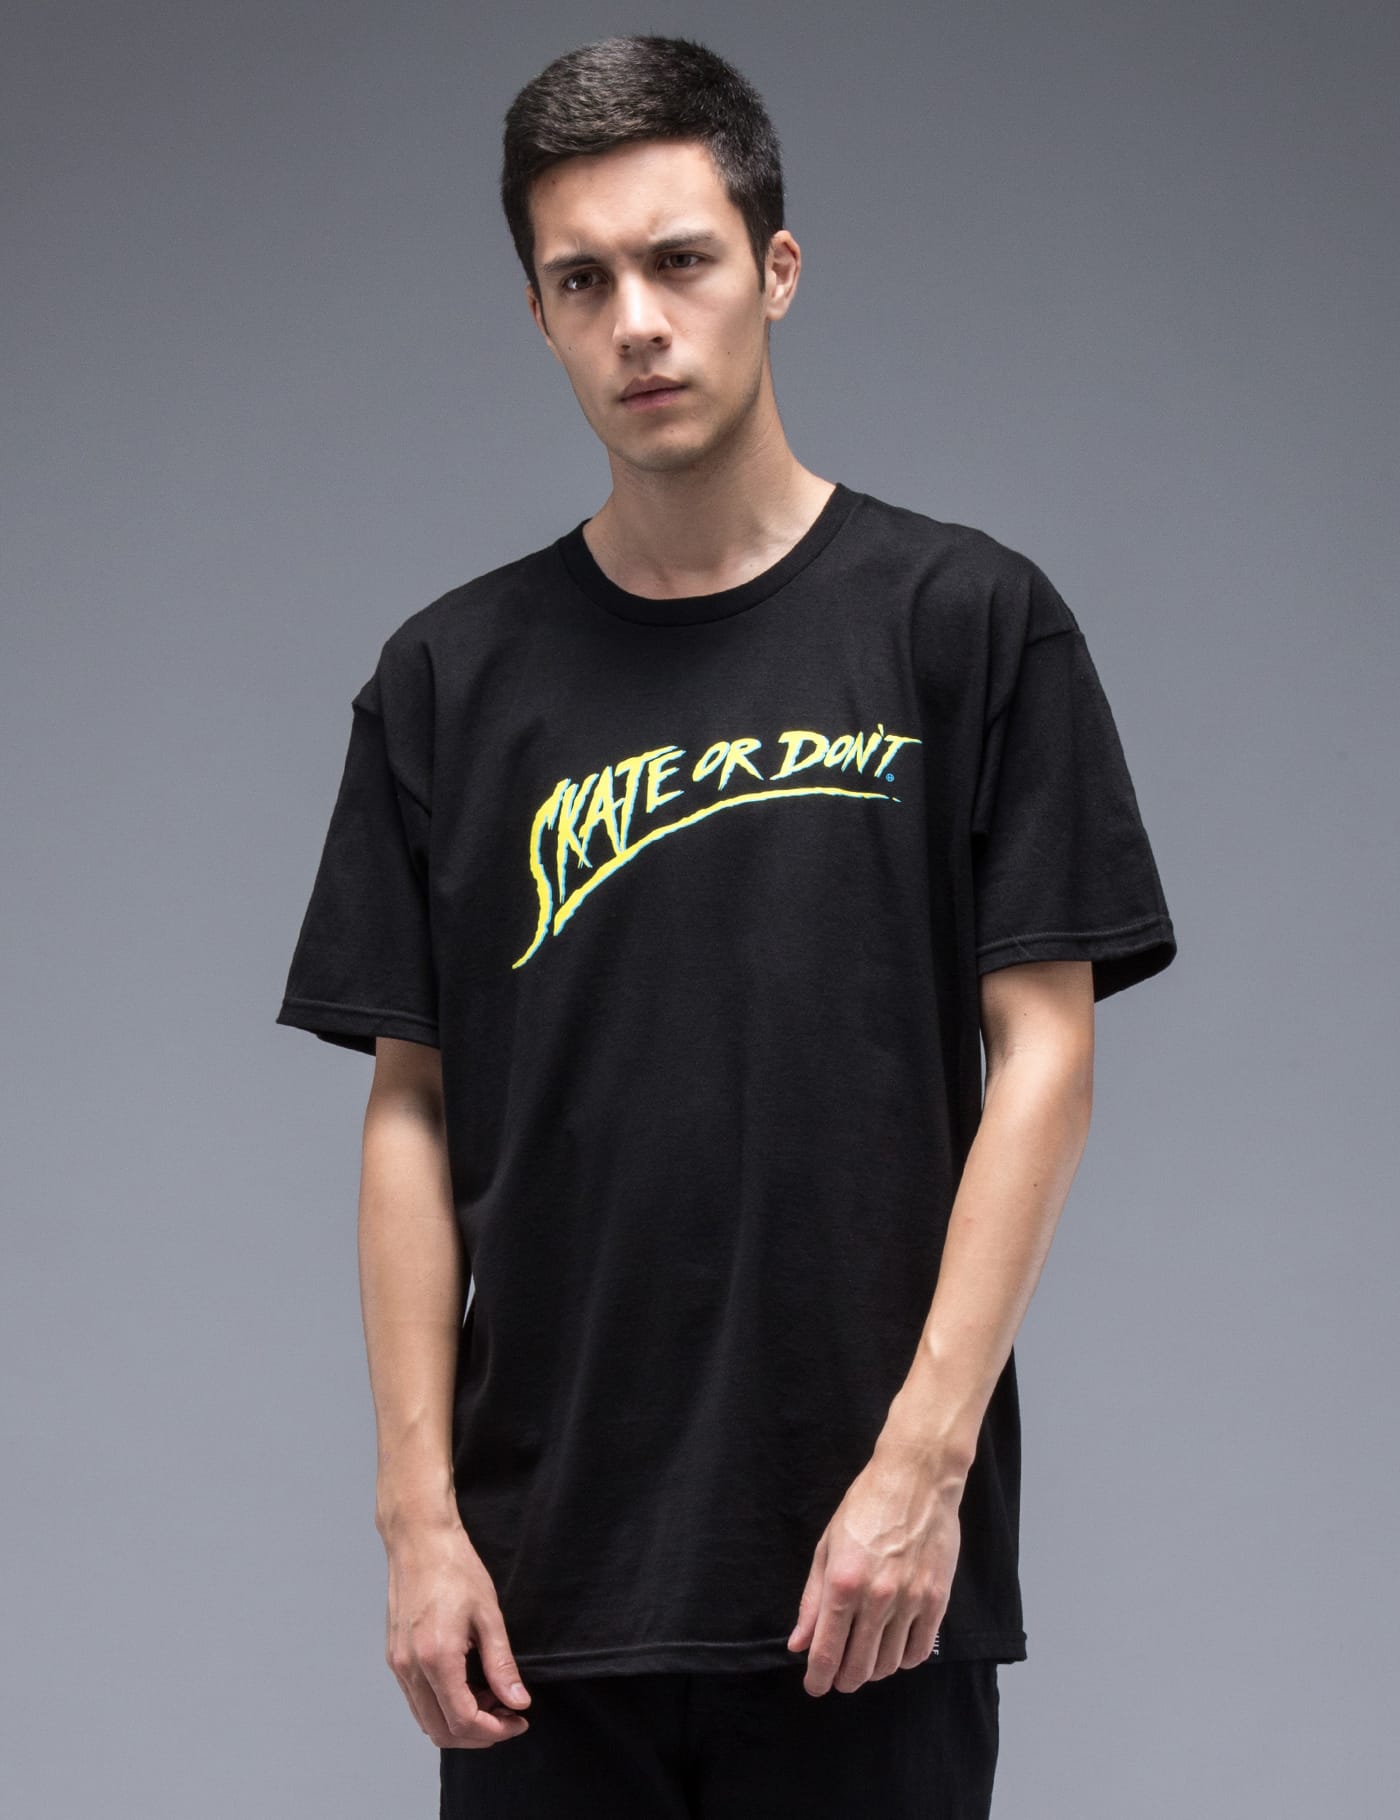 Huf - Skate or Don't S/S T-Shirt | HBX - Globally Curated Fashion